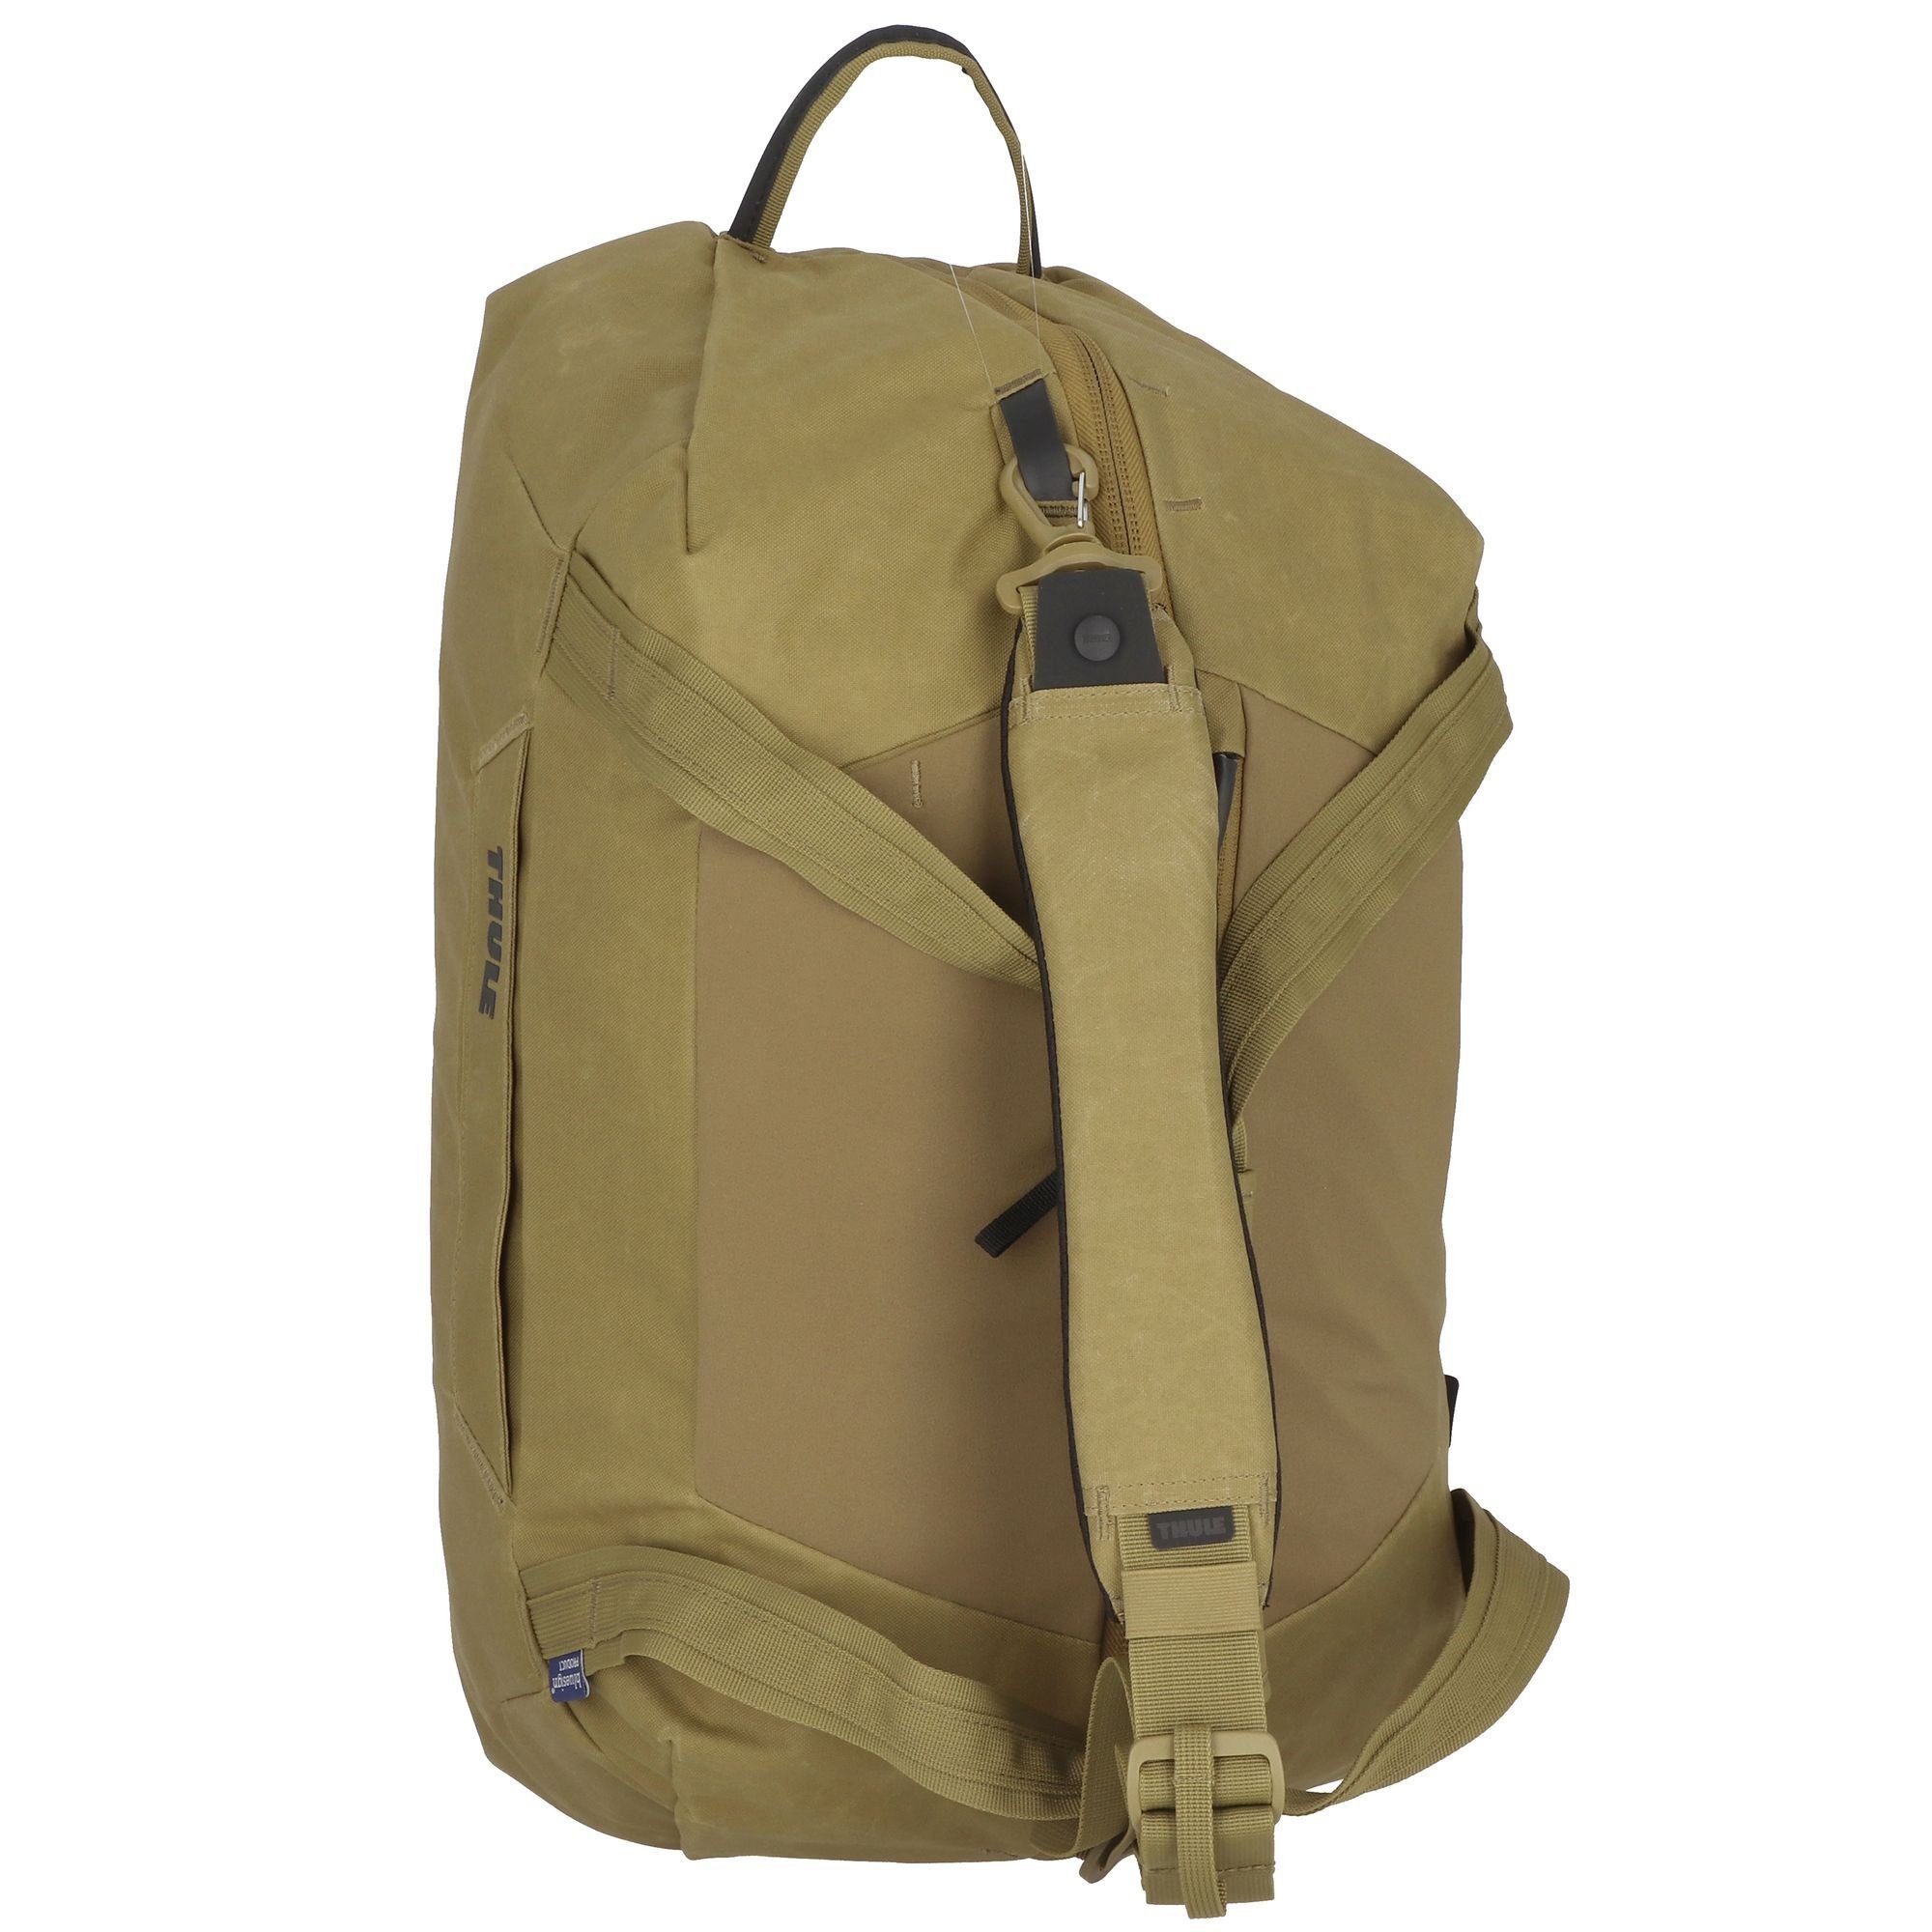 Thule Weekender Aion, Polyester nutria